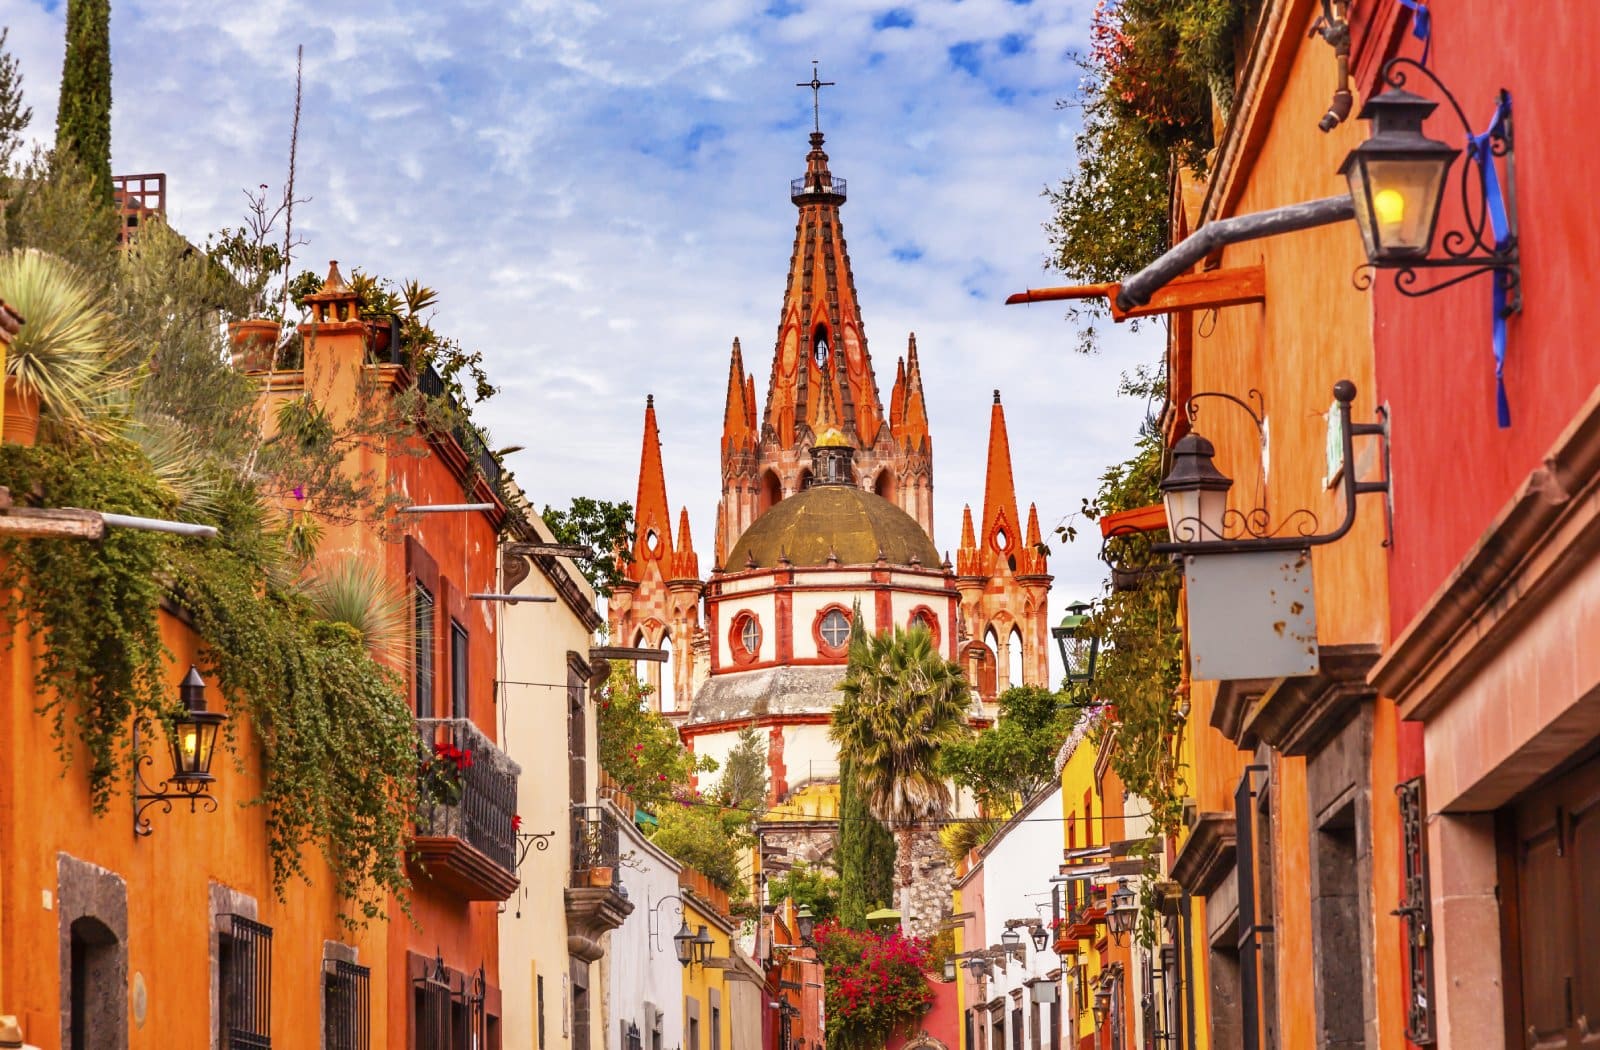 <p class="wp-caption-text">Image Credit: Shutterstock / Bill Perry</p>  <p><span>San Miguel de Allende, a UNESCO World Heritage site, is renowned for its well-preserved Spanish colonial architecture, thriving arts scene, and cultural festivals. The city’s historic center radiates charm and elegance with its cobblestone streets and baroque Spanish buildings. San Miguel de Allende is a hub for artists and writers from around the world, drawn by its beauty and vibrant community.</span></p>